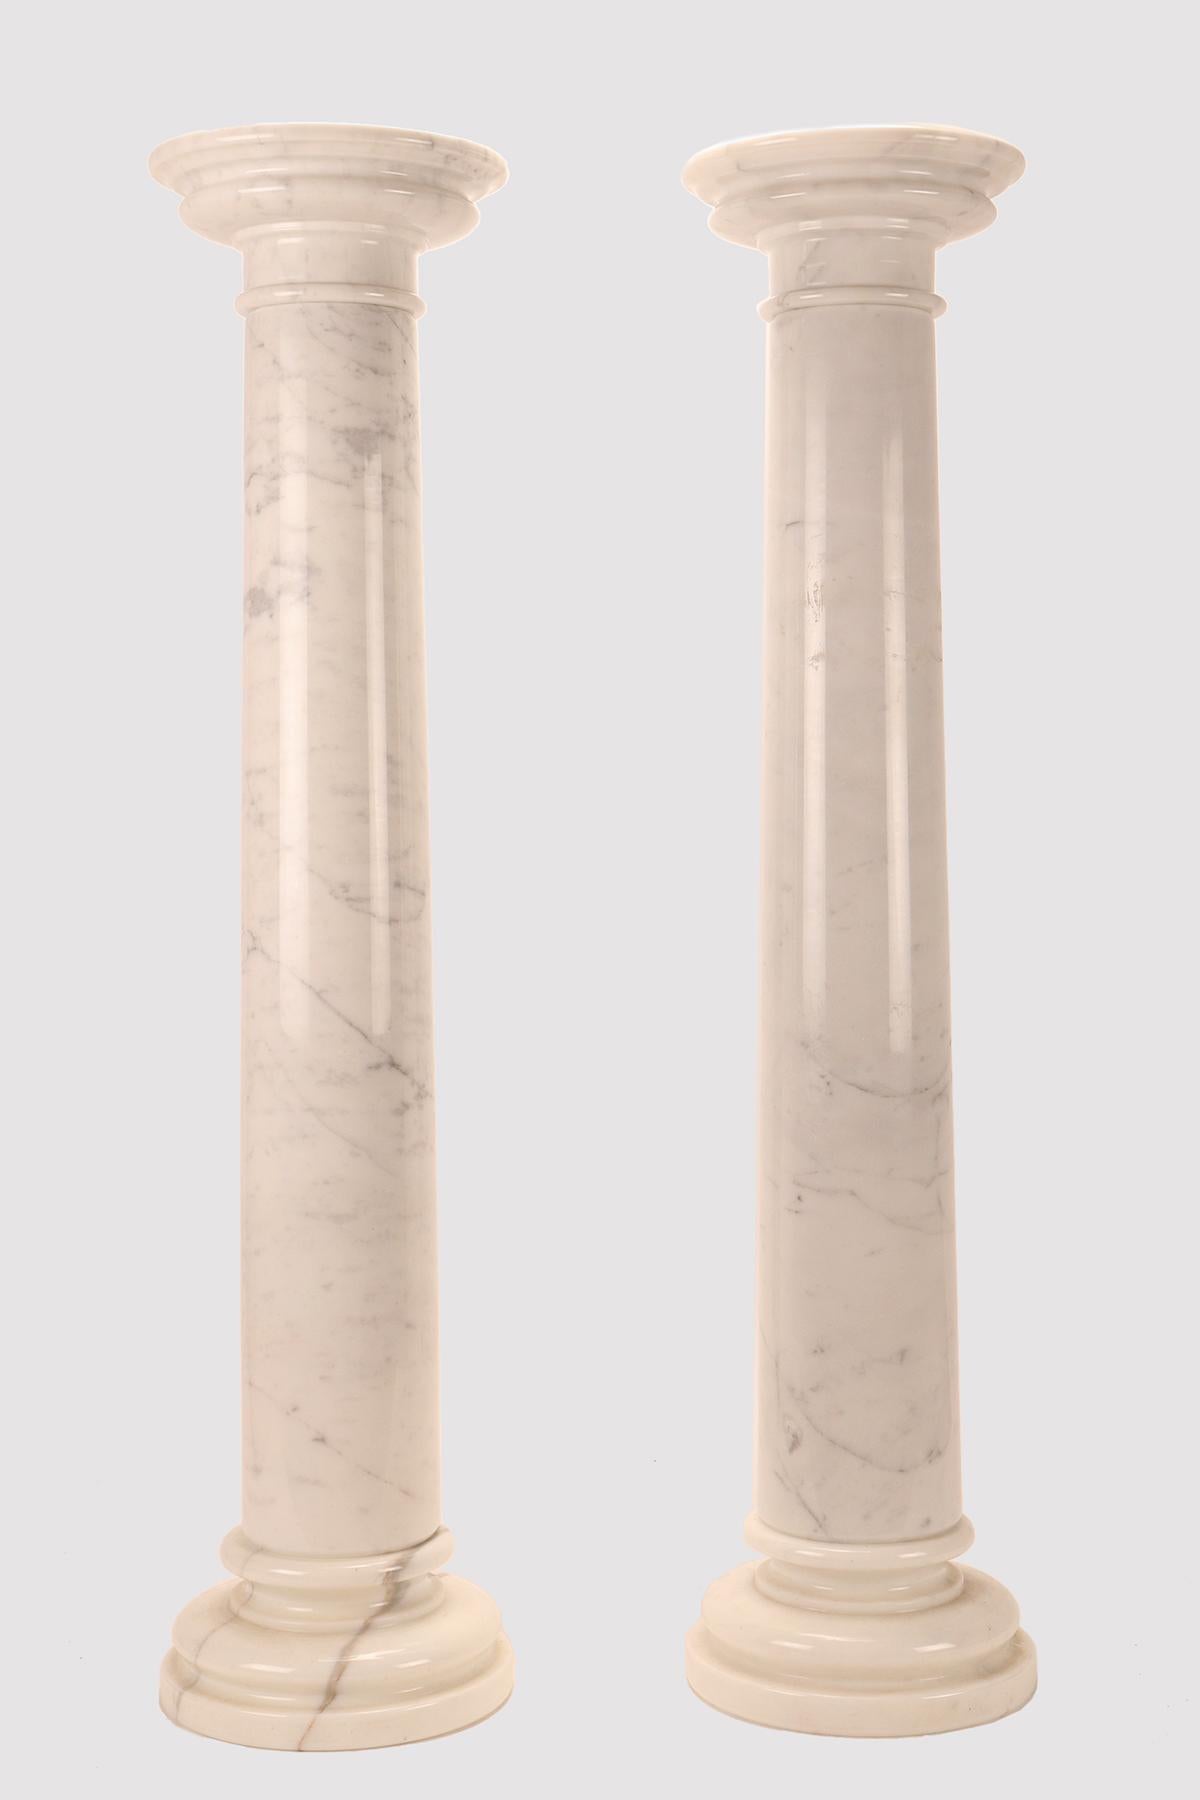 A pair of columns in white Carrara marble.
The columns are sculpted in three distinct elements of white Carrara marble, one for the base, the second for the shaft, the third for the capital. Designed both as a decorative and functional element,